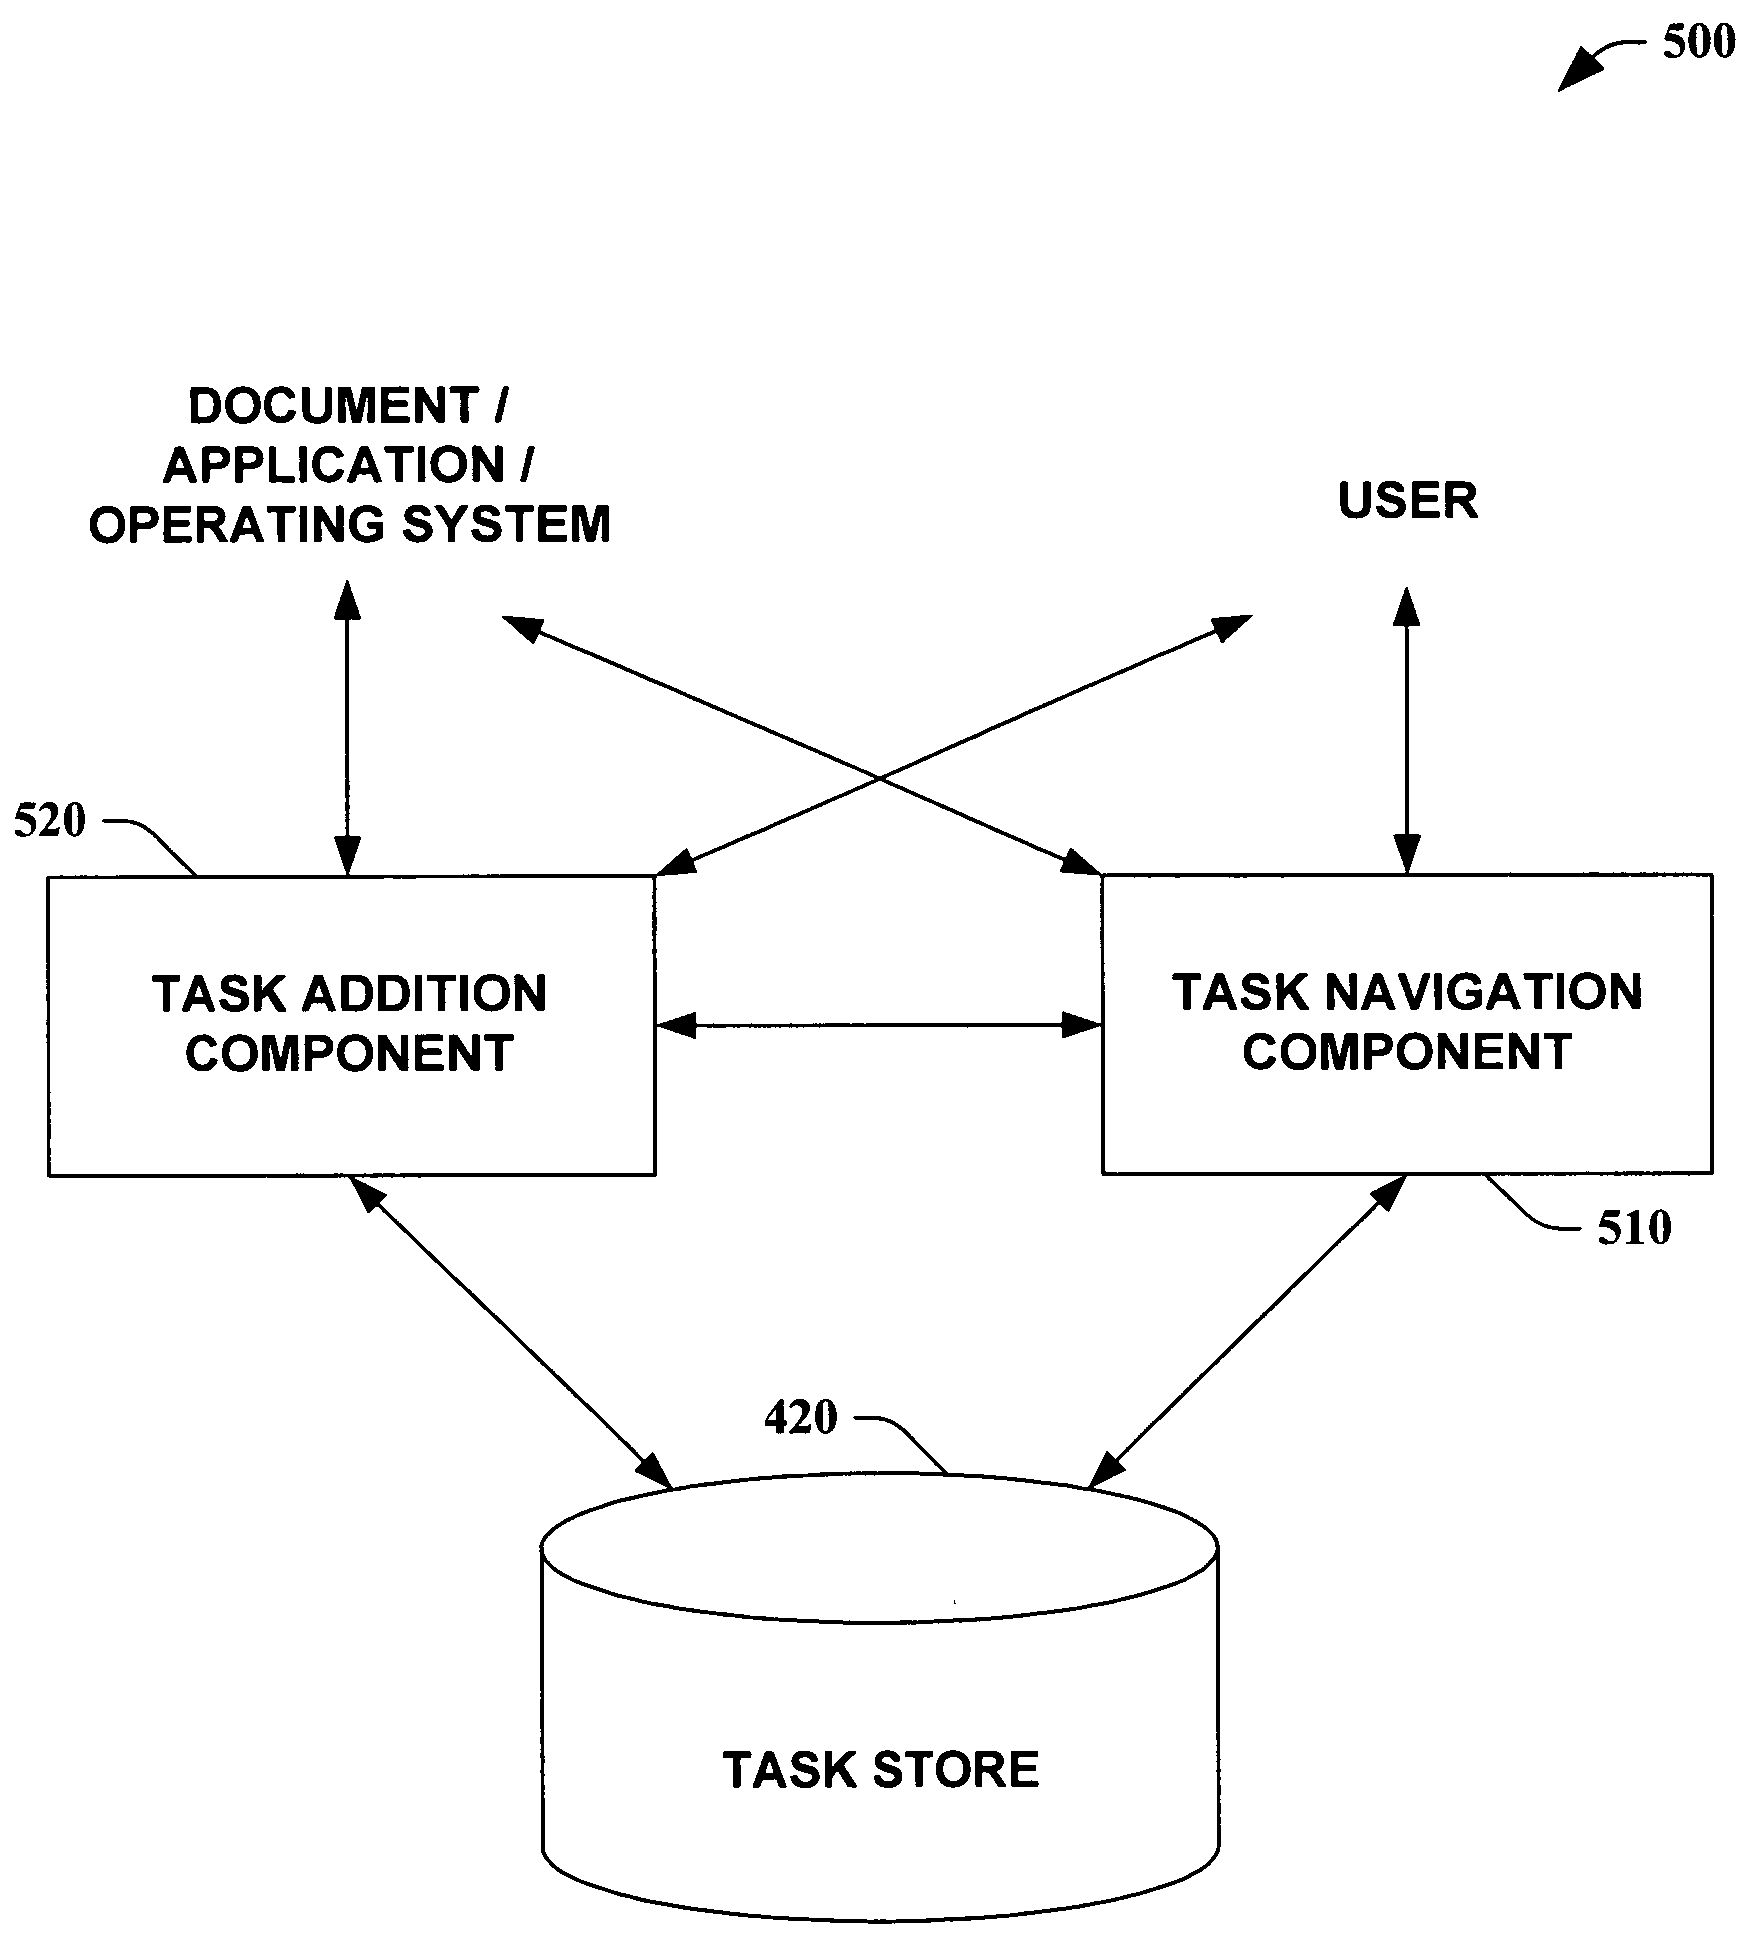 Task oriented user interface model for document centric software applications